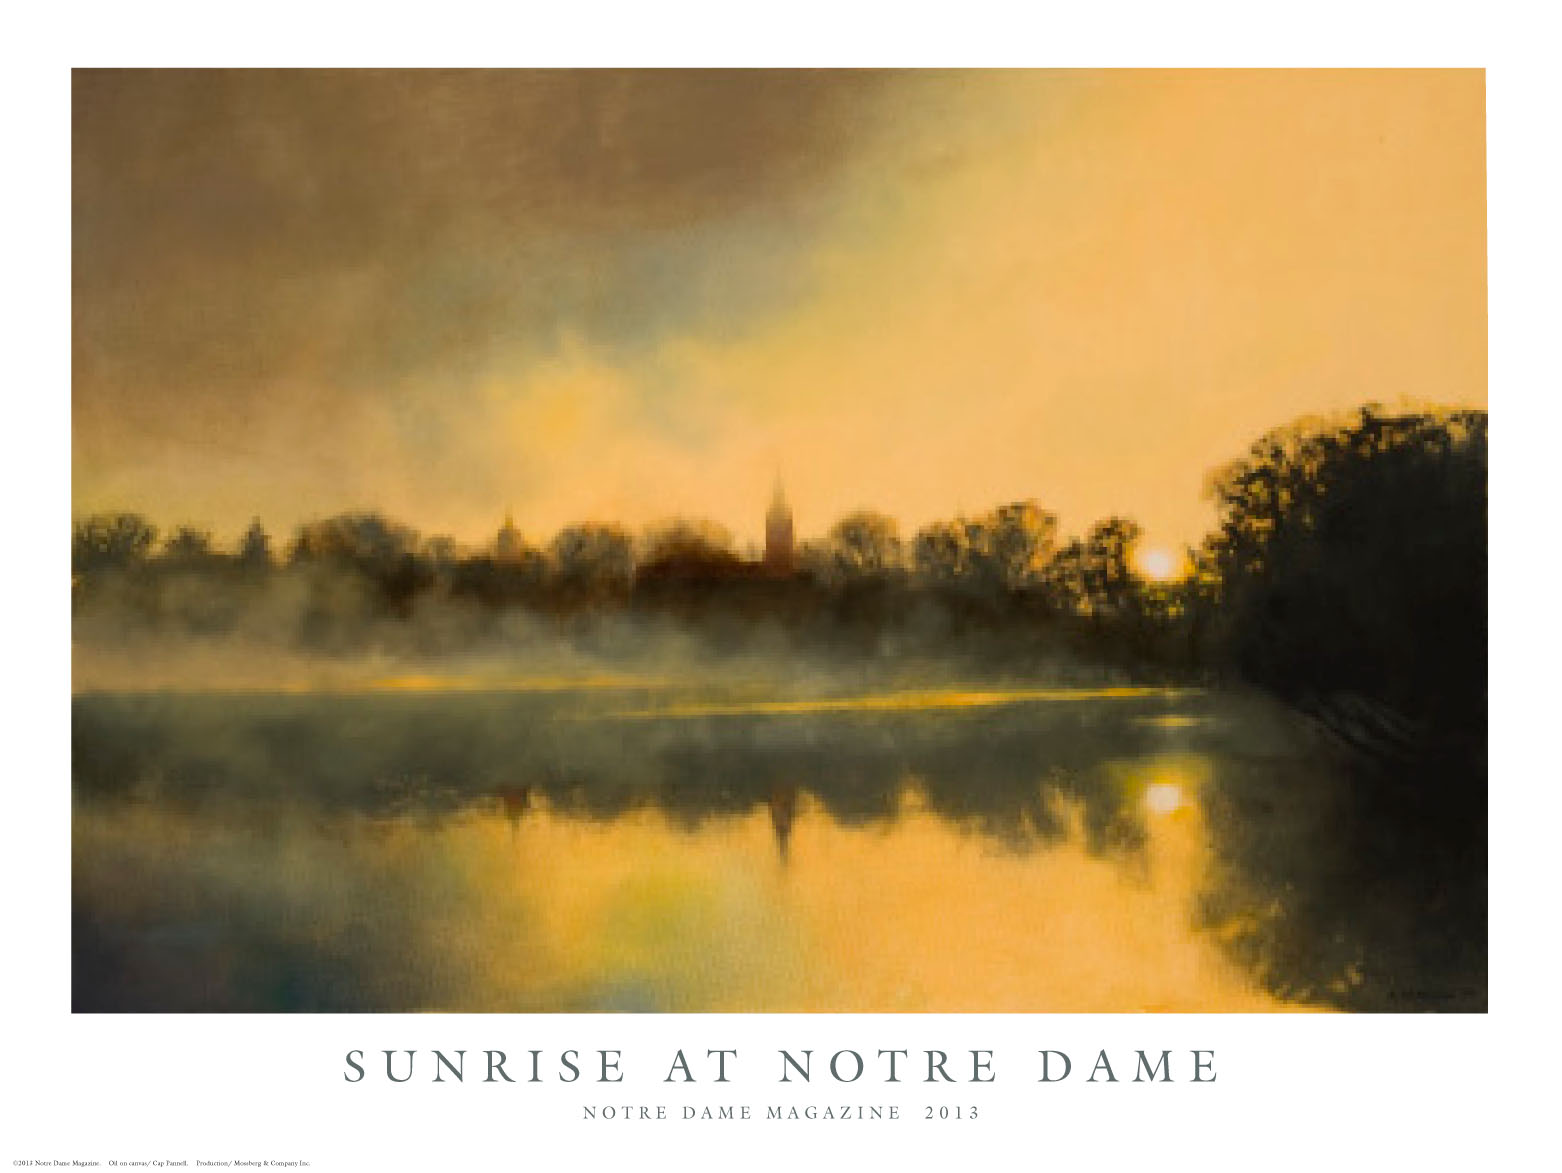 Sunrise at Notre Dame, artwork by Cap Pannell